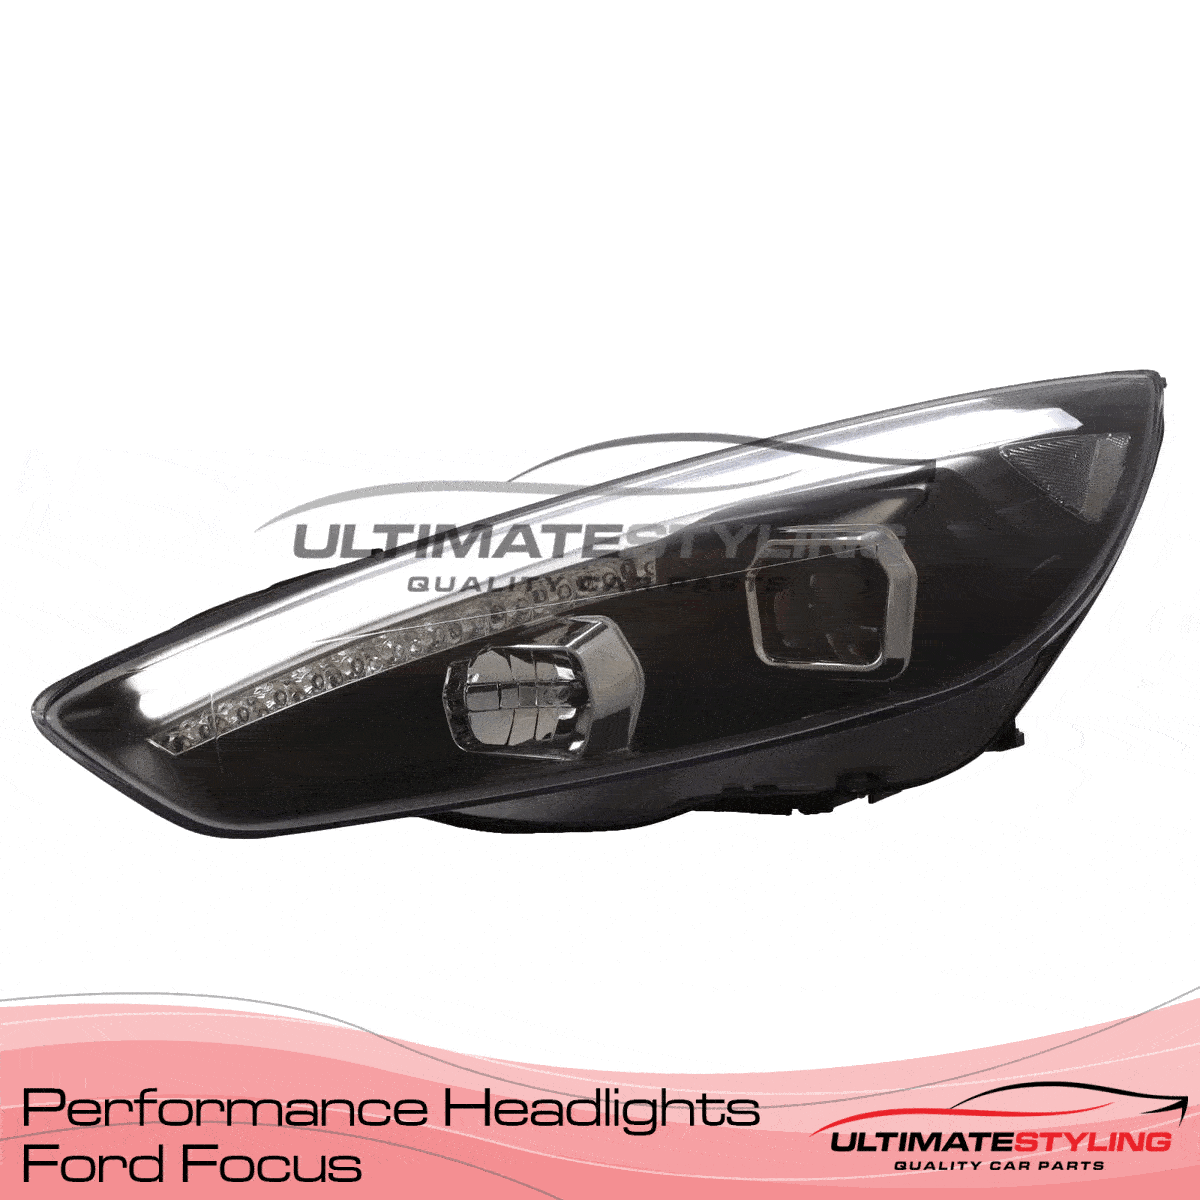 360 view of a Ford Focus aftermarket headlight upgrade